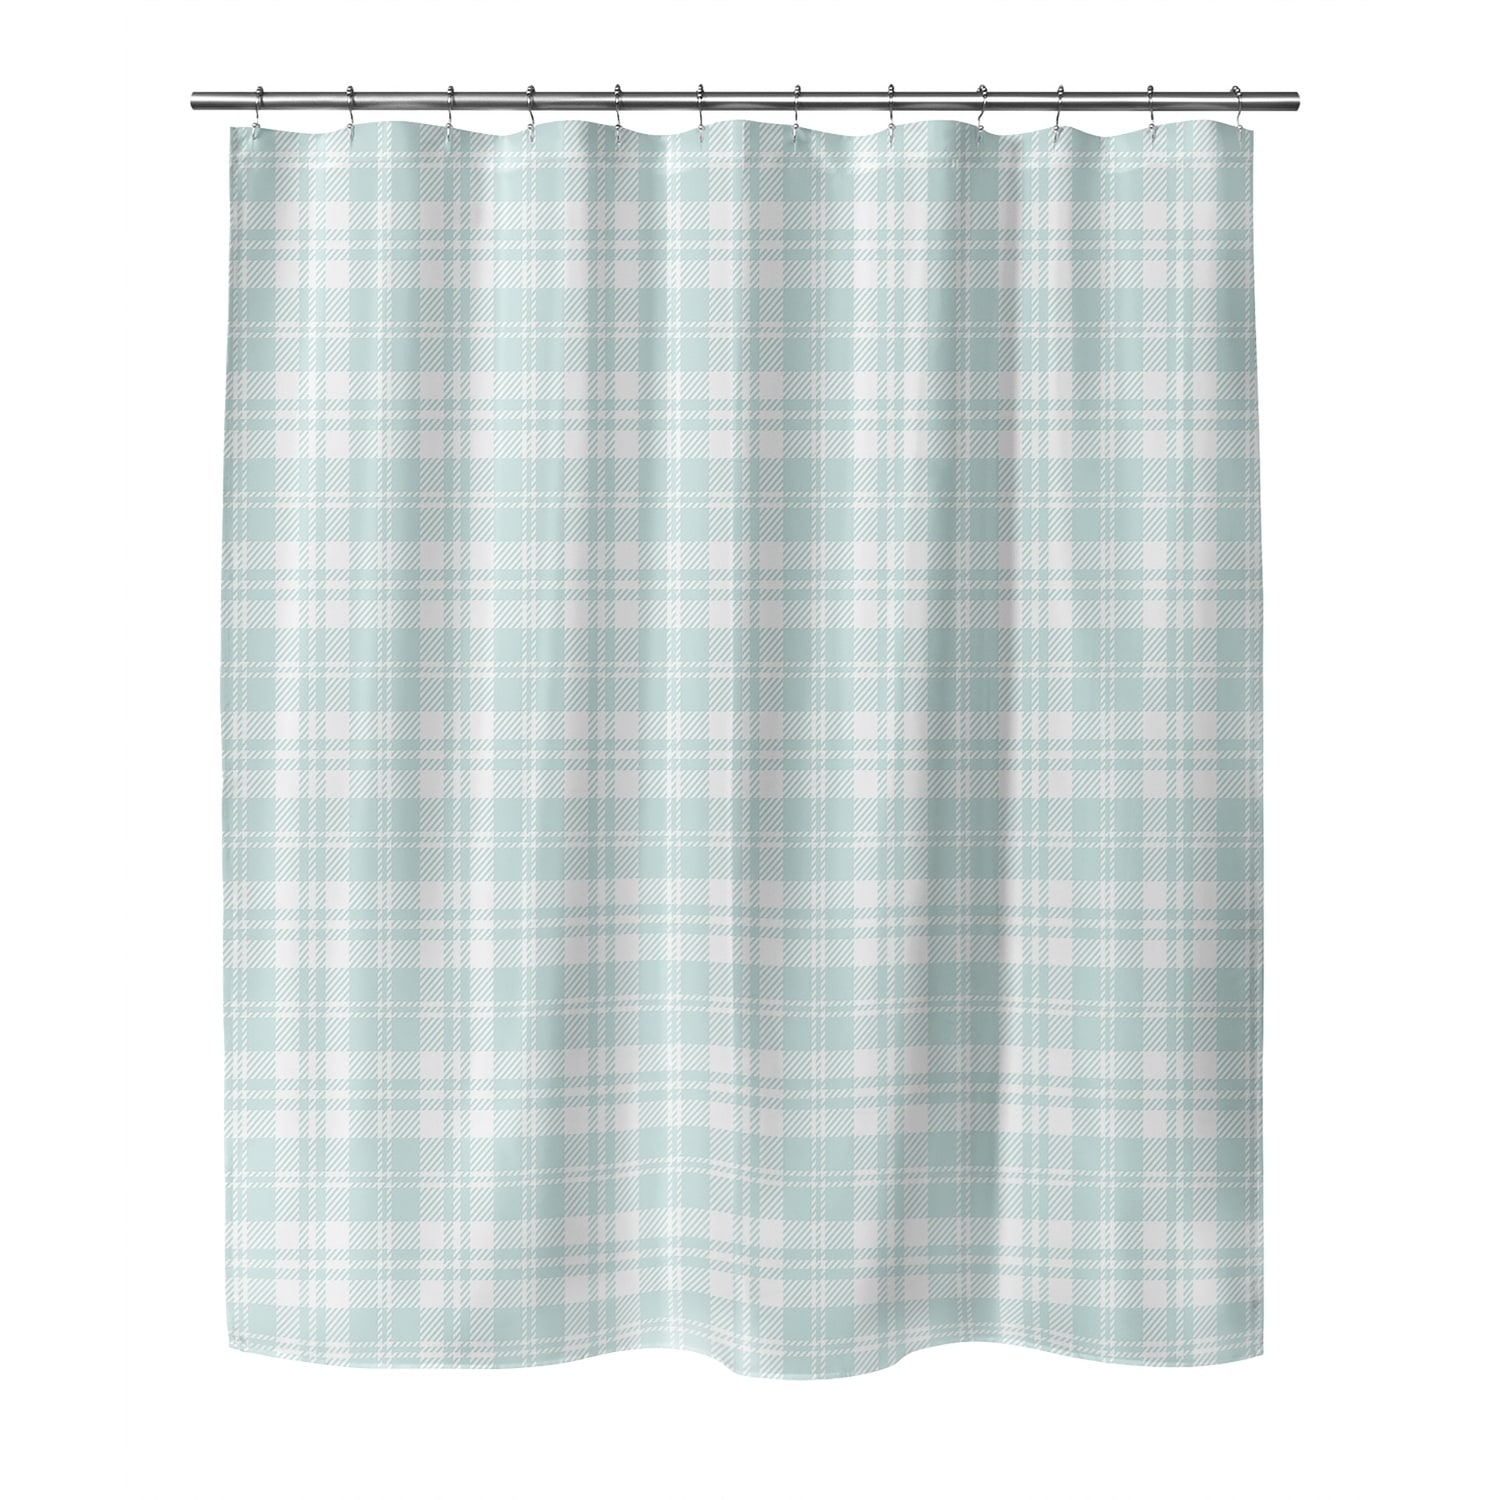 seafoam shower curtain - Interior Design Tips For The Best First ...